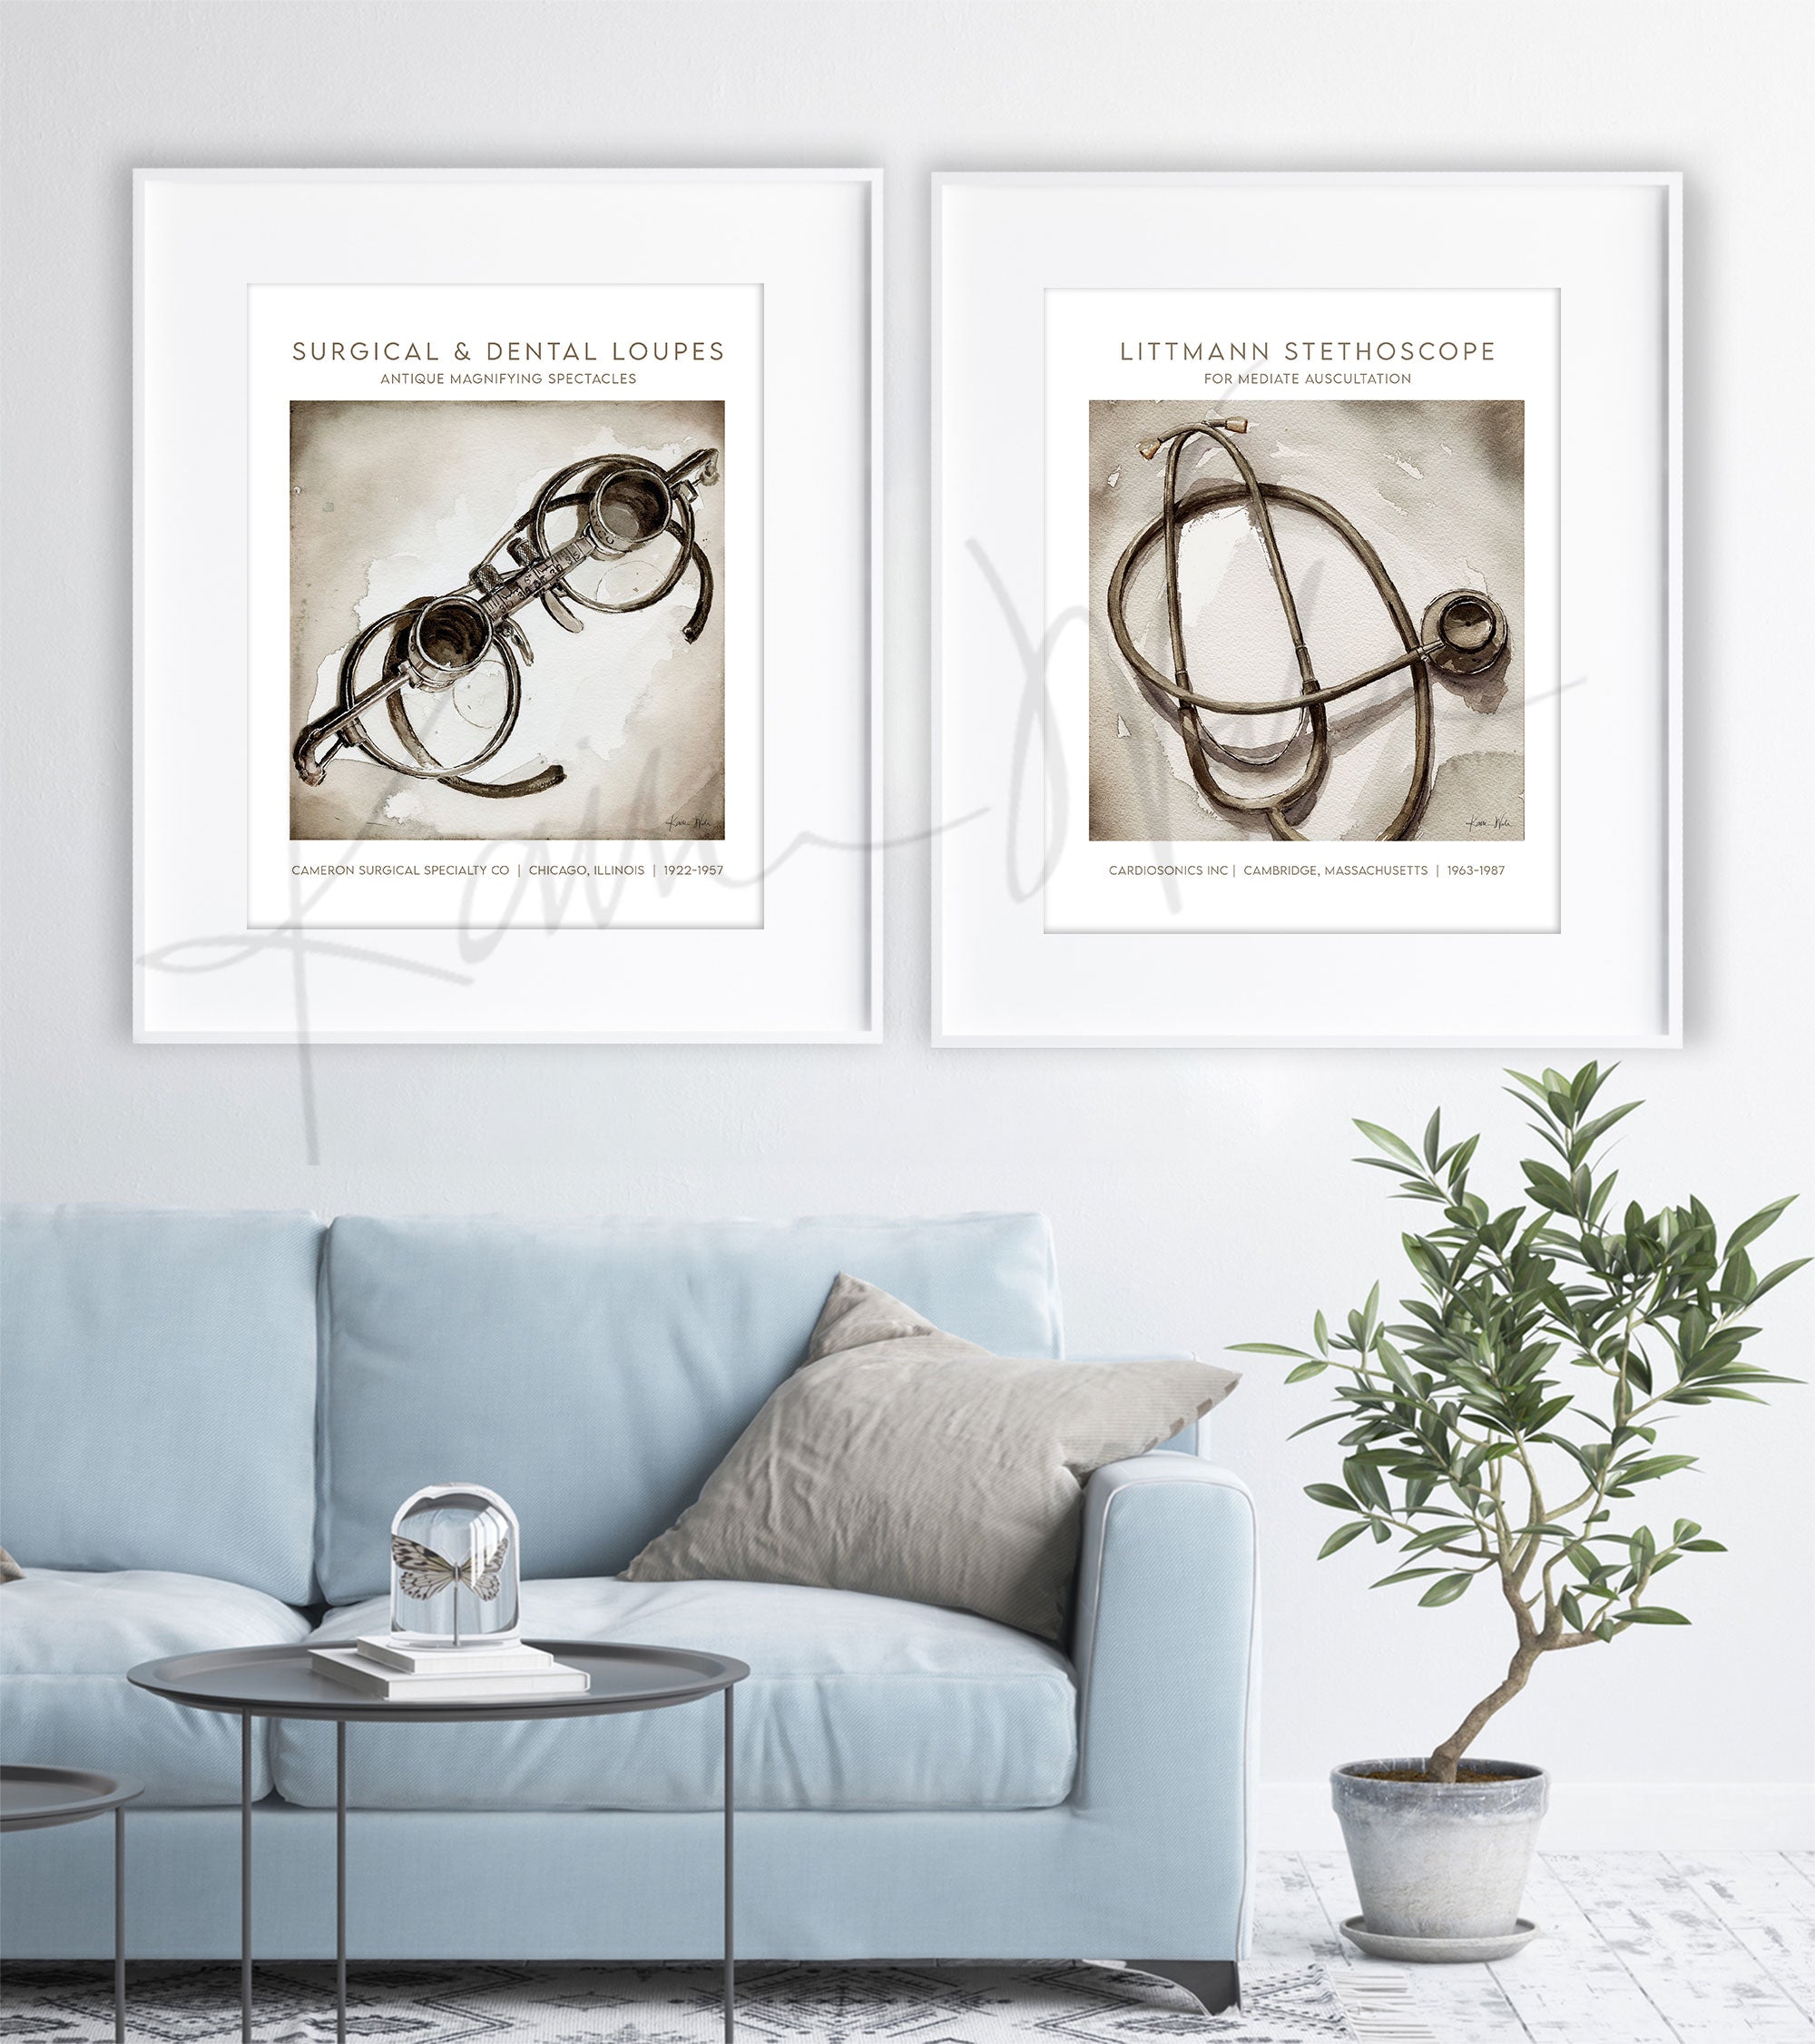 Framed watercolor painting set of a Littmann stethoscope and antique dental loupes. The painting is hanging over a blue couch.